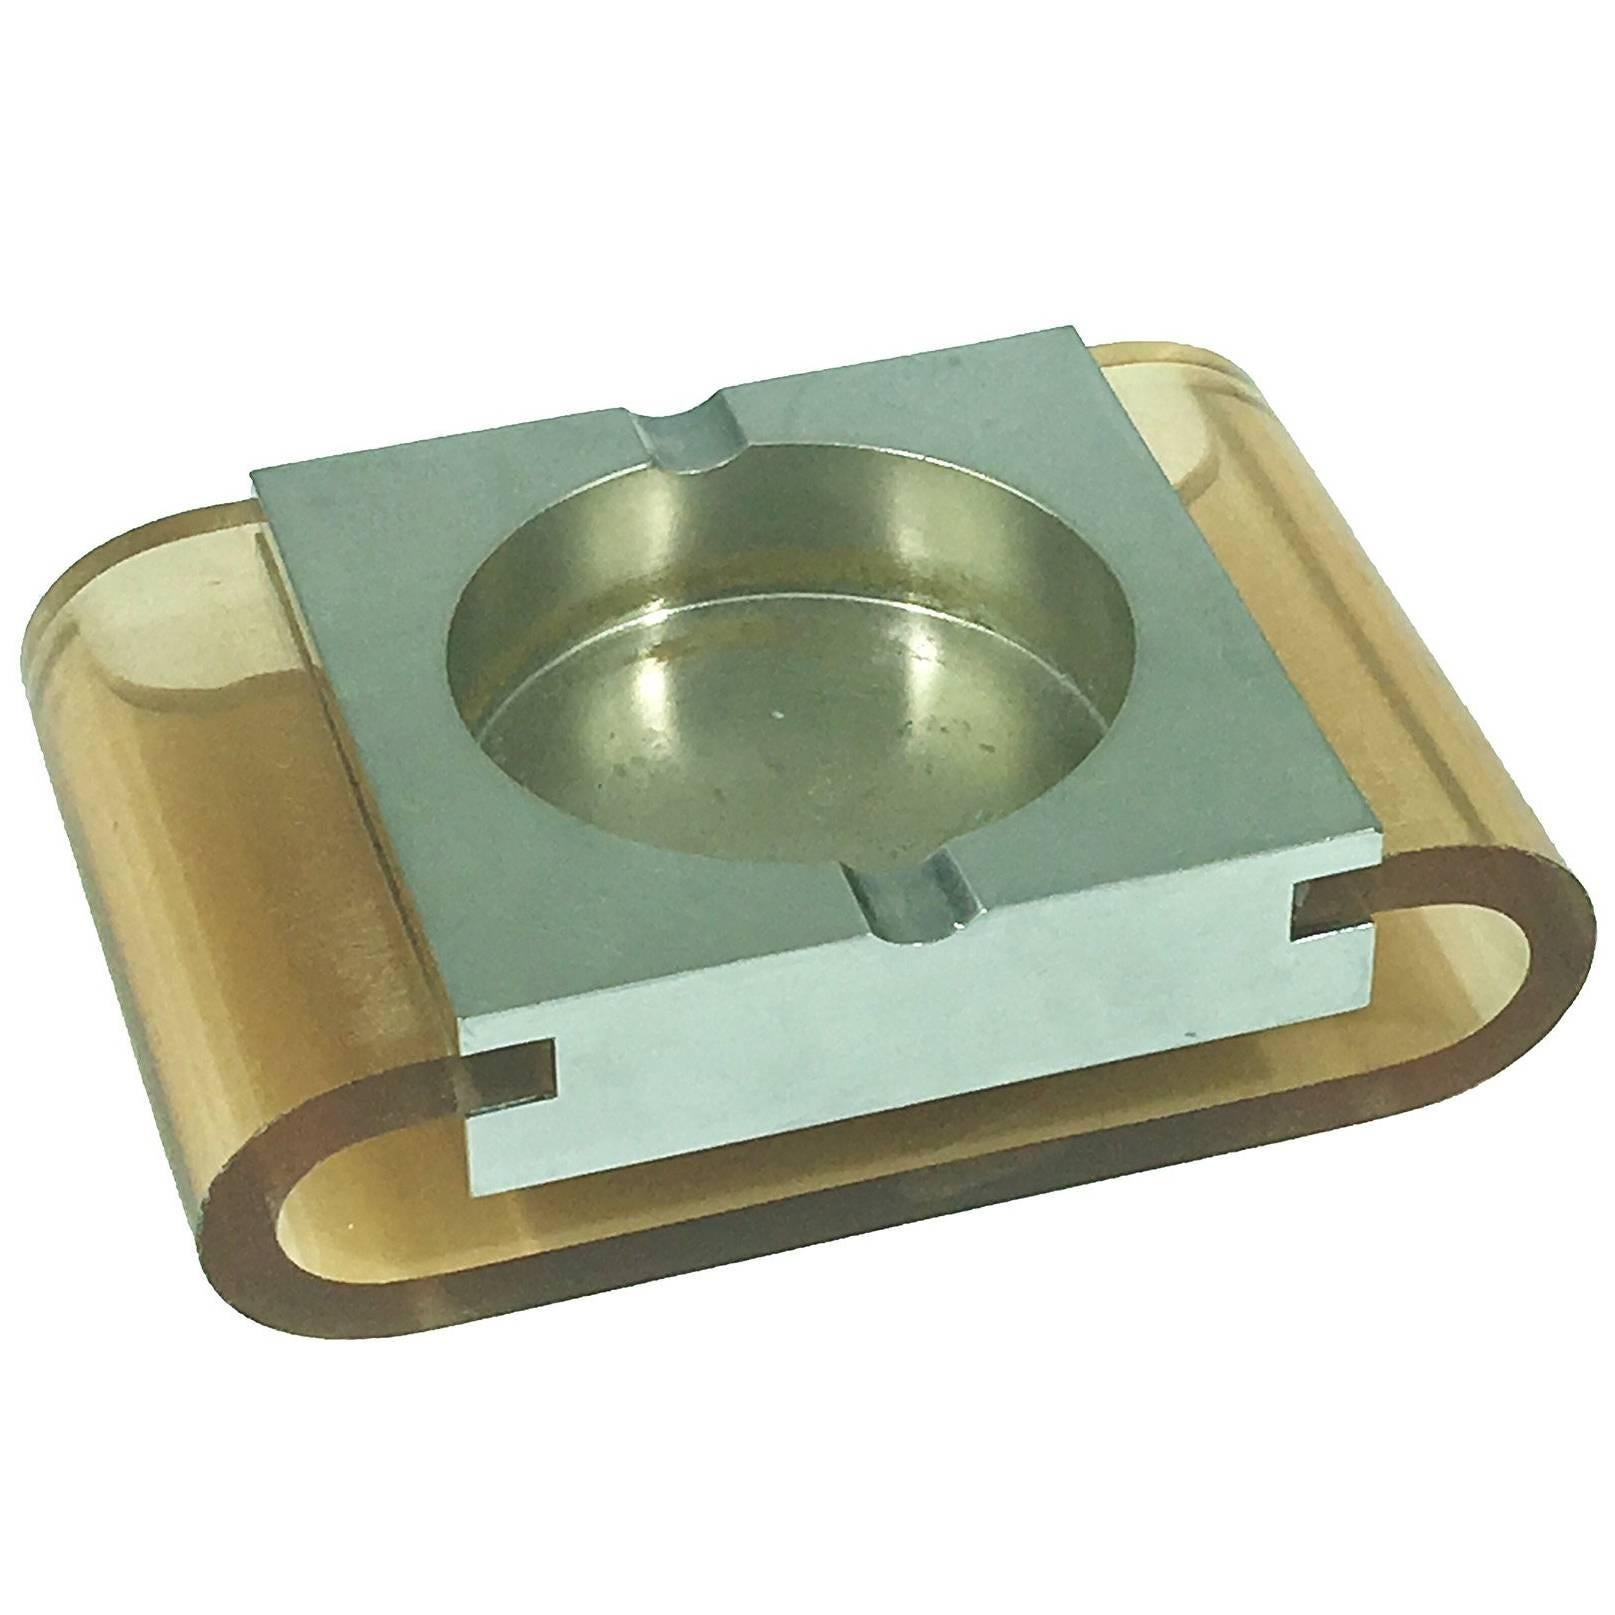 1970 Stainless Steel and Plexiglass Ashtray